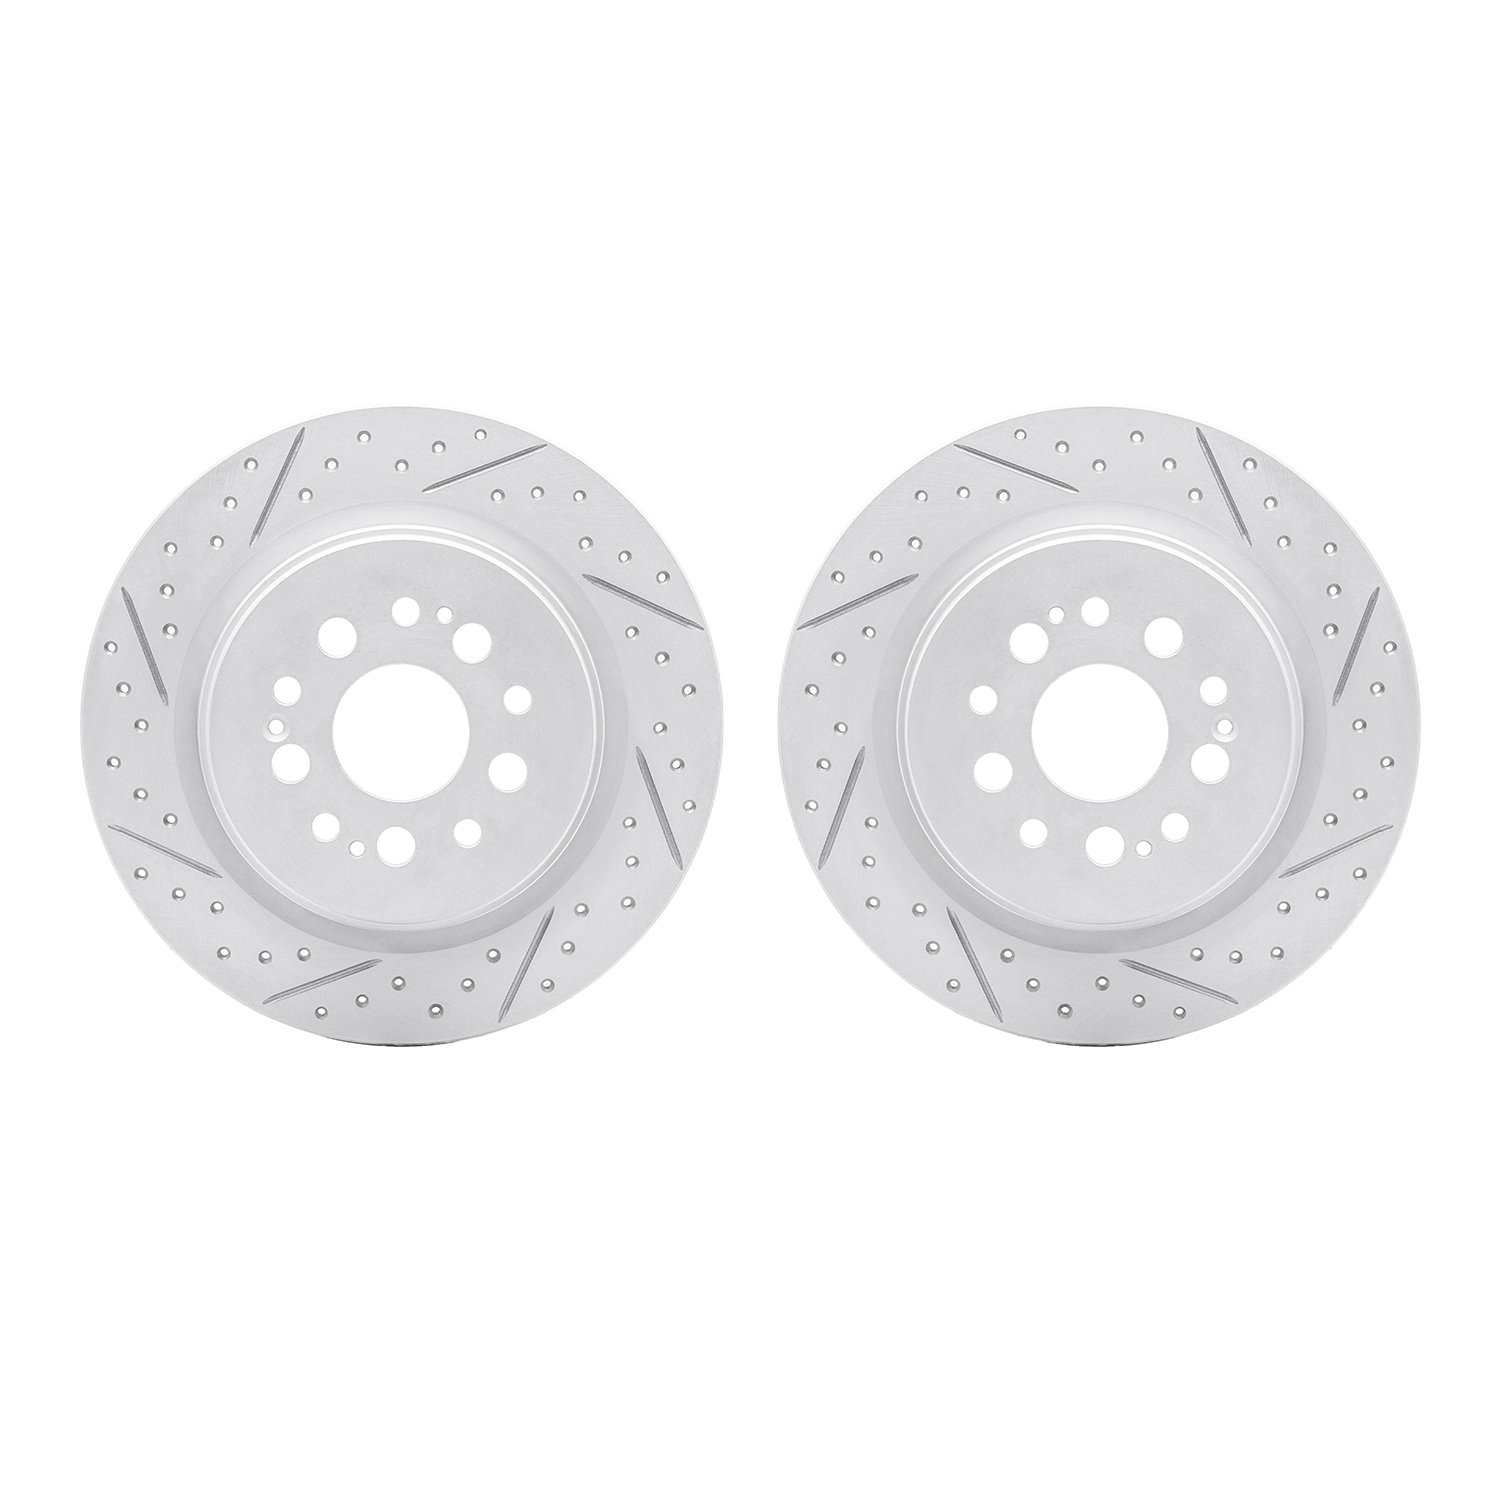 2002-59041 Geoperformance Drilled/Slotted Brake Rotors, Fits Select Acura/Honda, Position: Rear